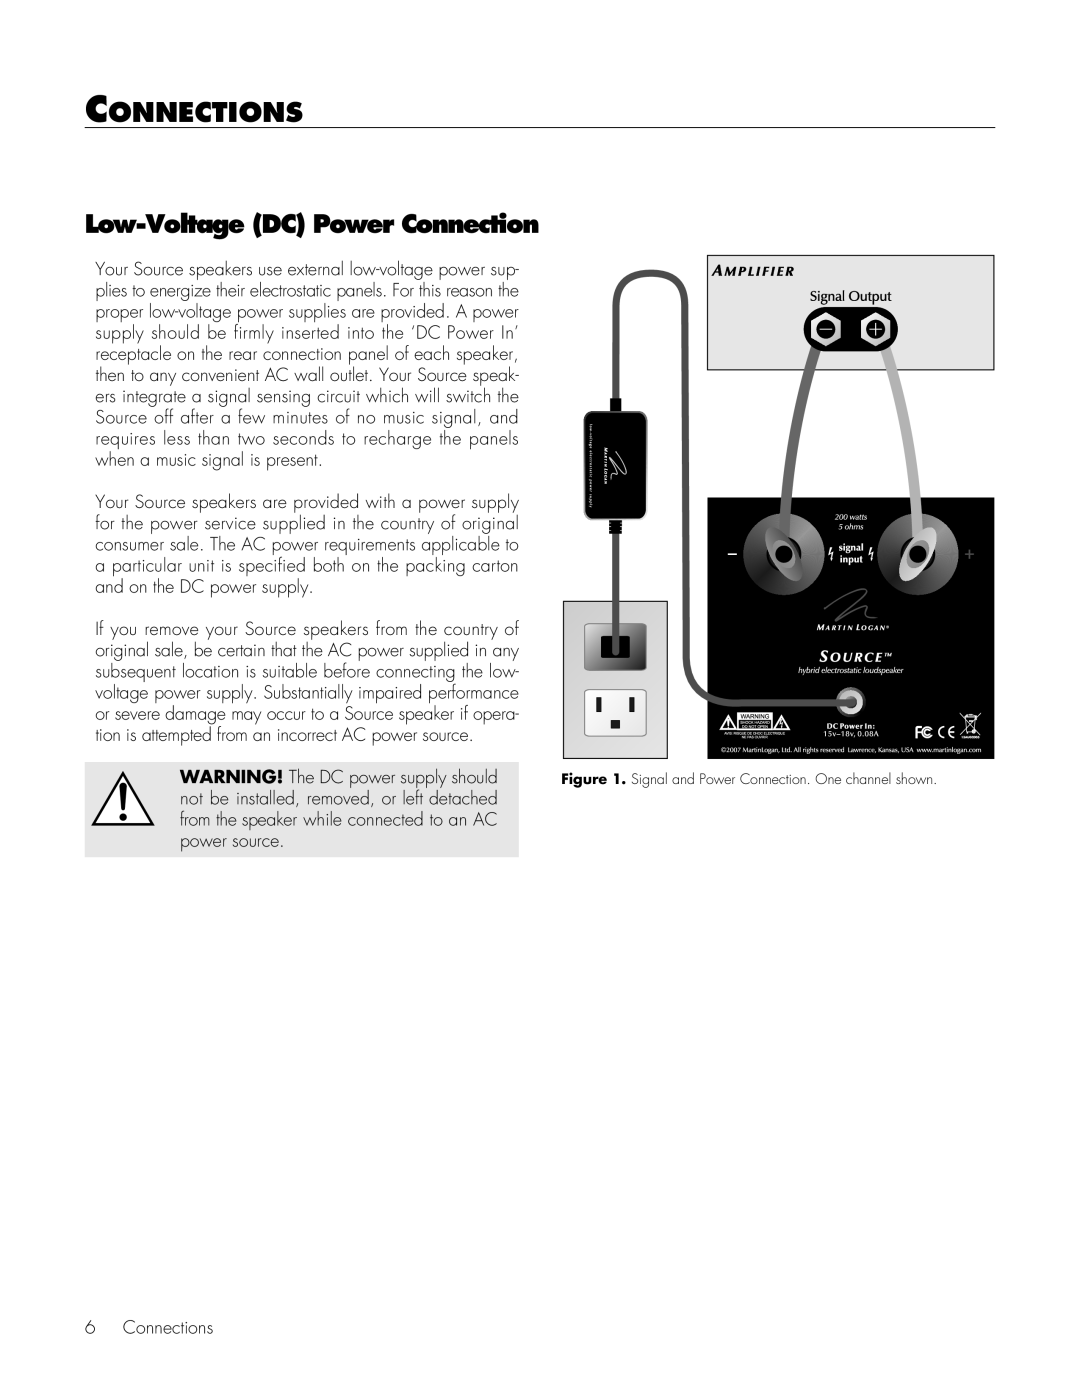 MartinLogan Source Speakers user manual Connections, Low-VoltageDC Power Connection 